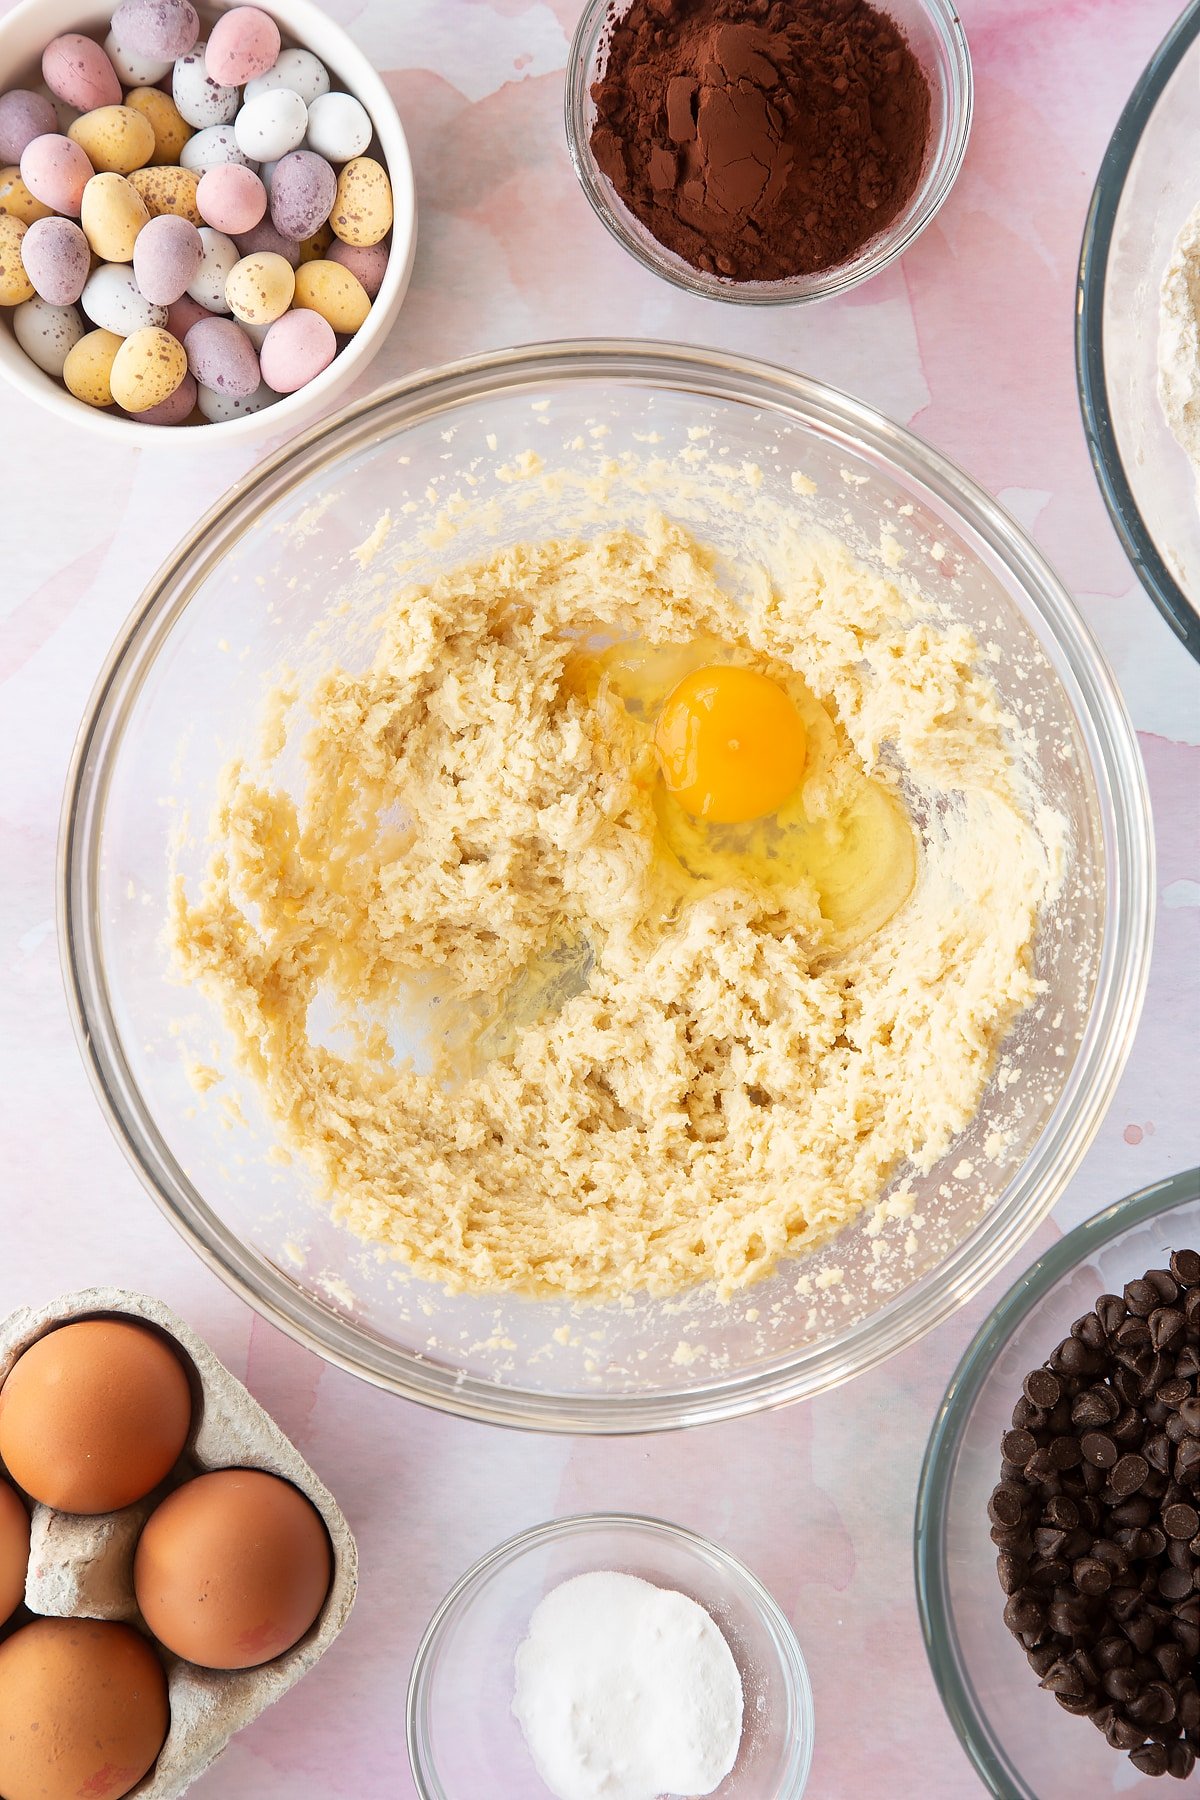 Butter and golden granulated sugar beaten together in a bowl with an egg on top. Ingredients to make Chocolate Easter cookies surround the bowl.